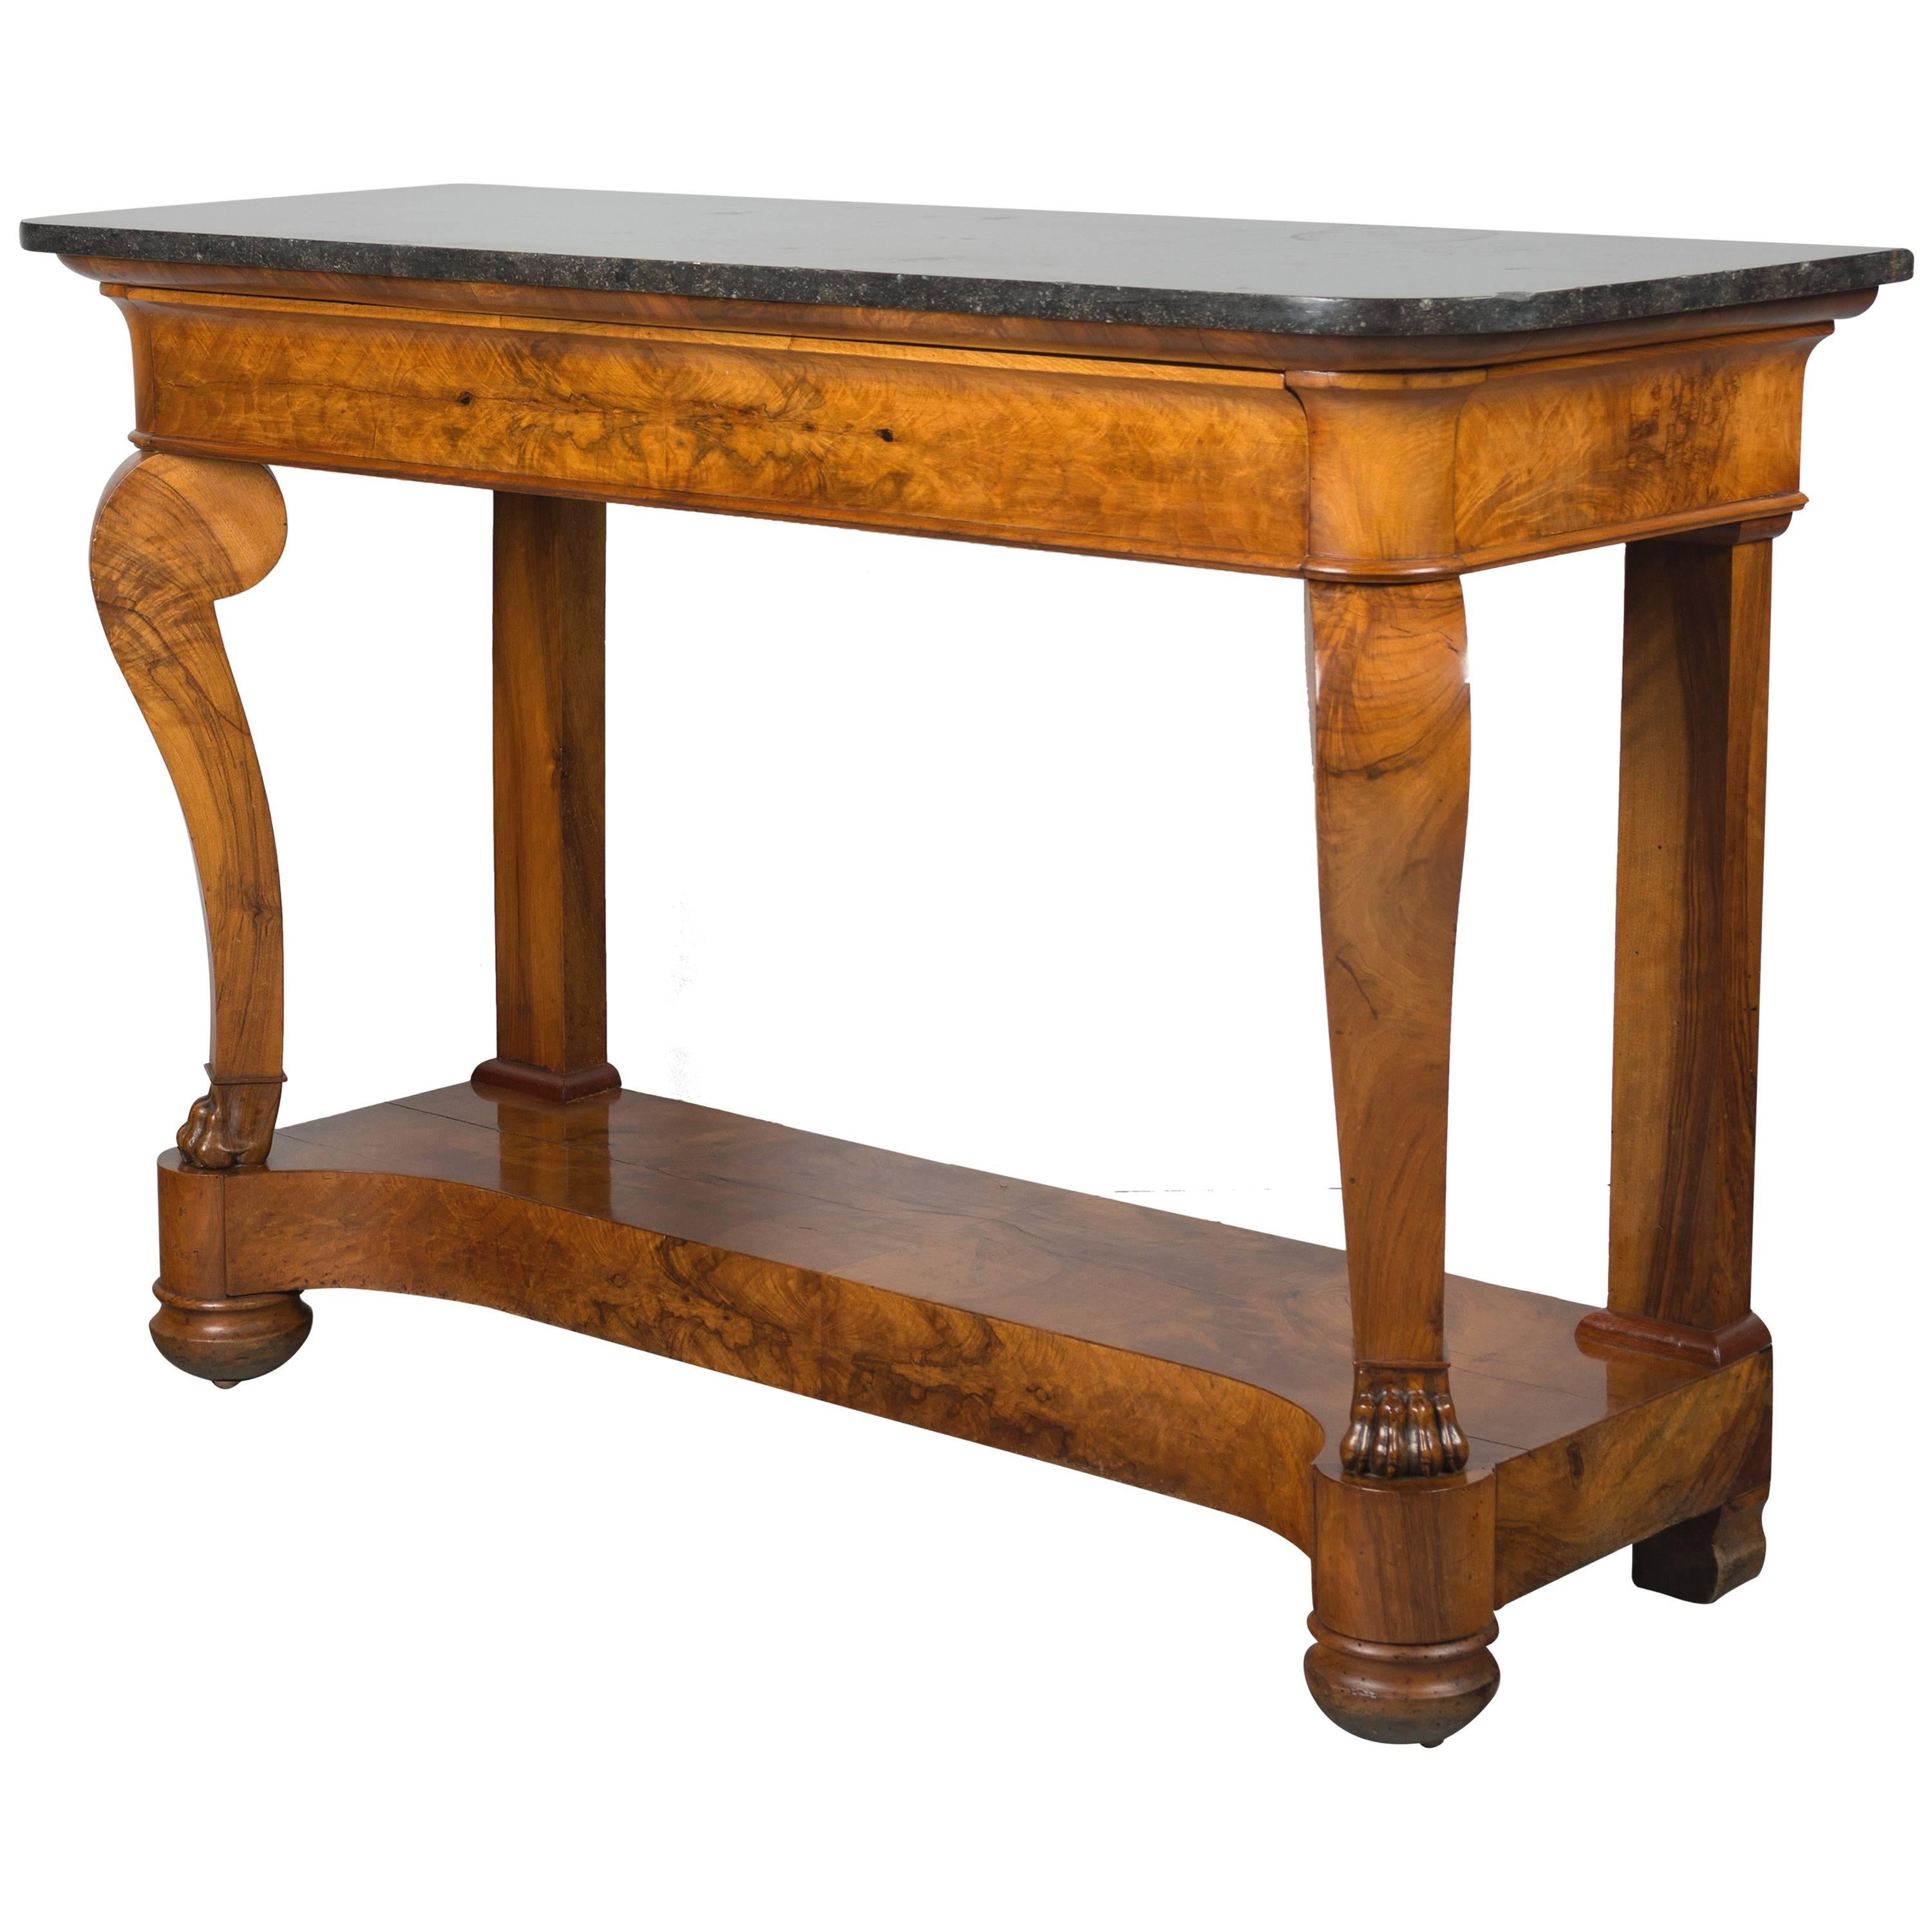 19th Century French Restauration Period Console